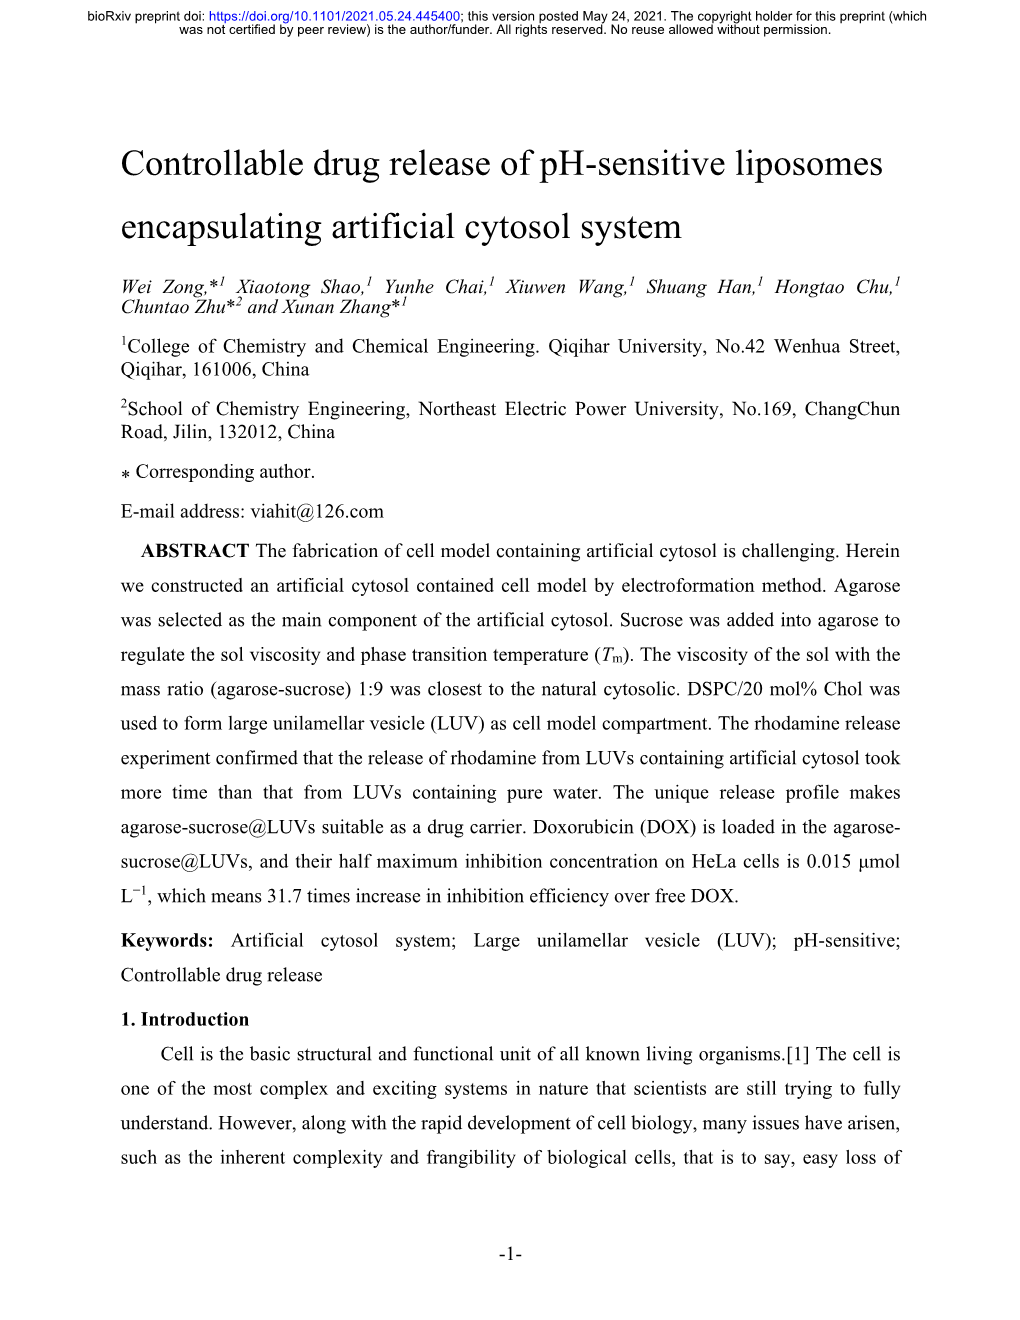 Controllable Drug Release of Ph-Sensitive Liposomes Encapsulating Artificial Cytosol System